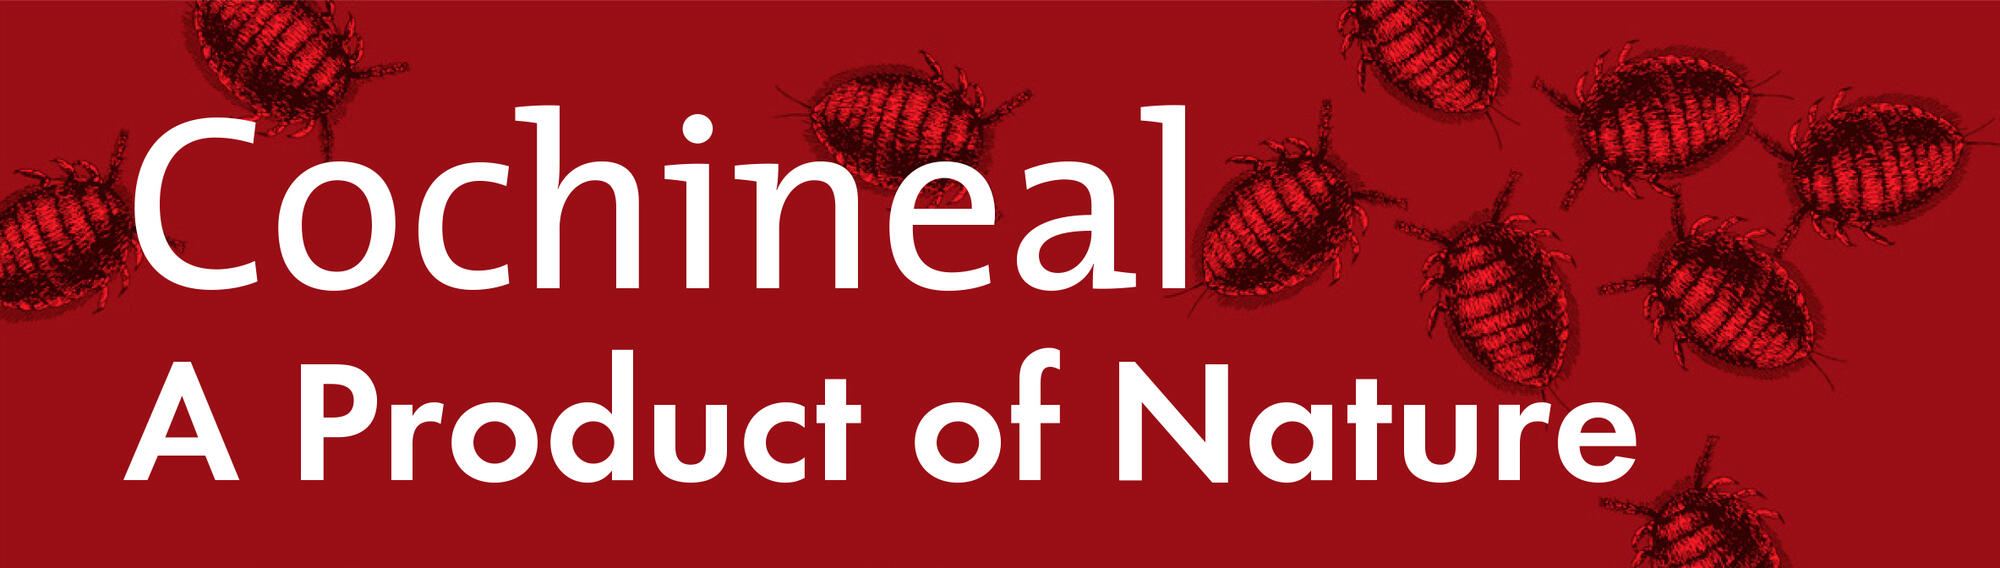 Red banner with illustrations of Cochineal with text &quot;Cochineal: A Product of Nature.&quot;